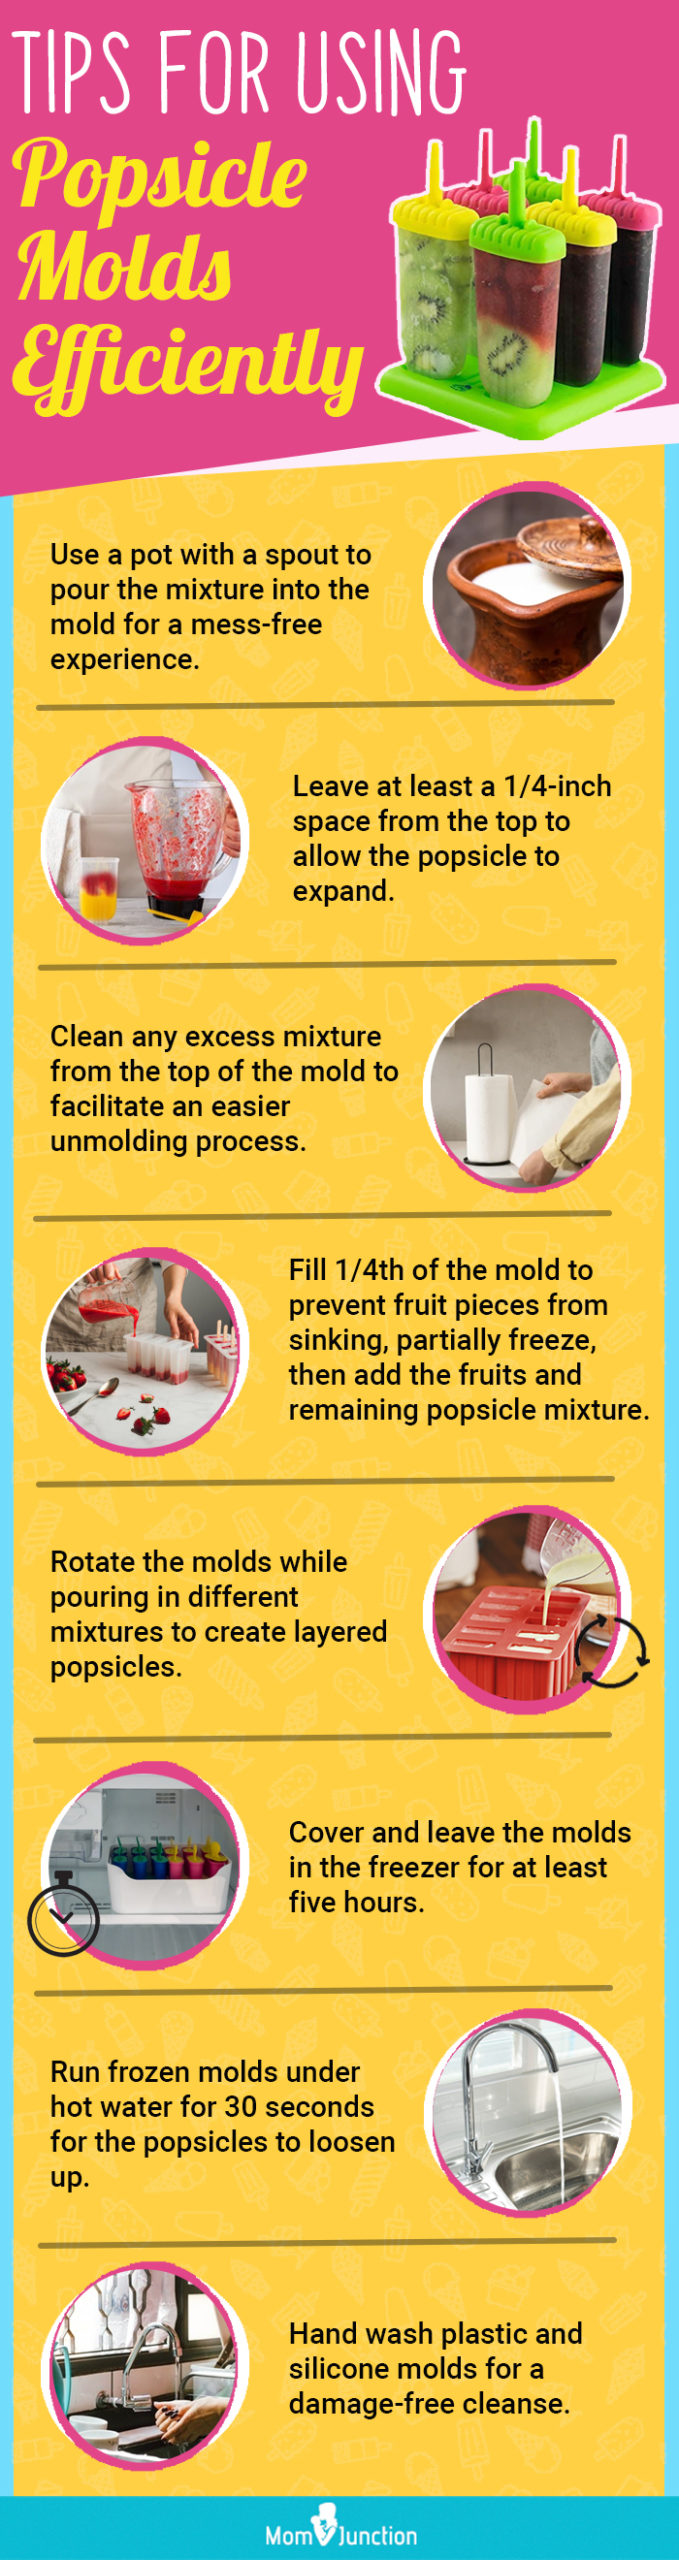 Tips For Using Popsicle Molds Efficiently (infographic)